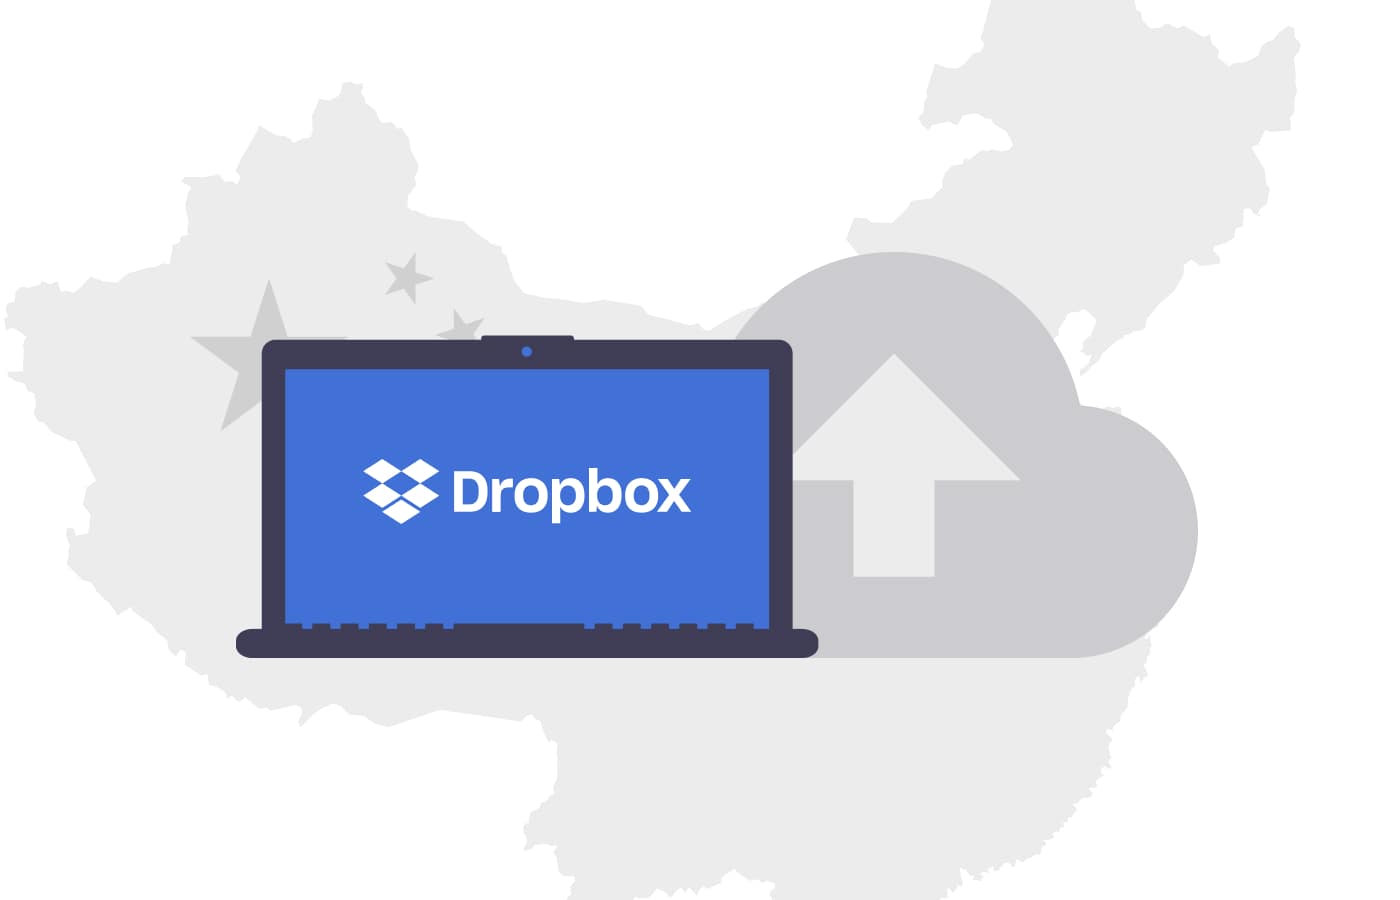 How to access Dropbox in China